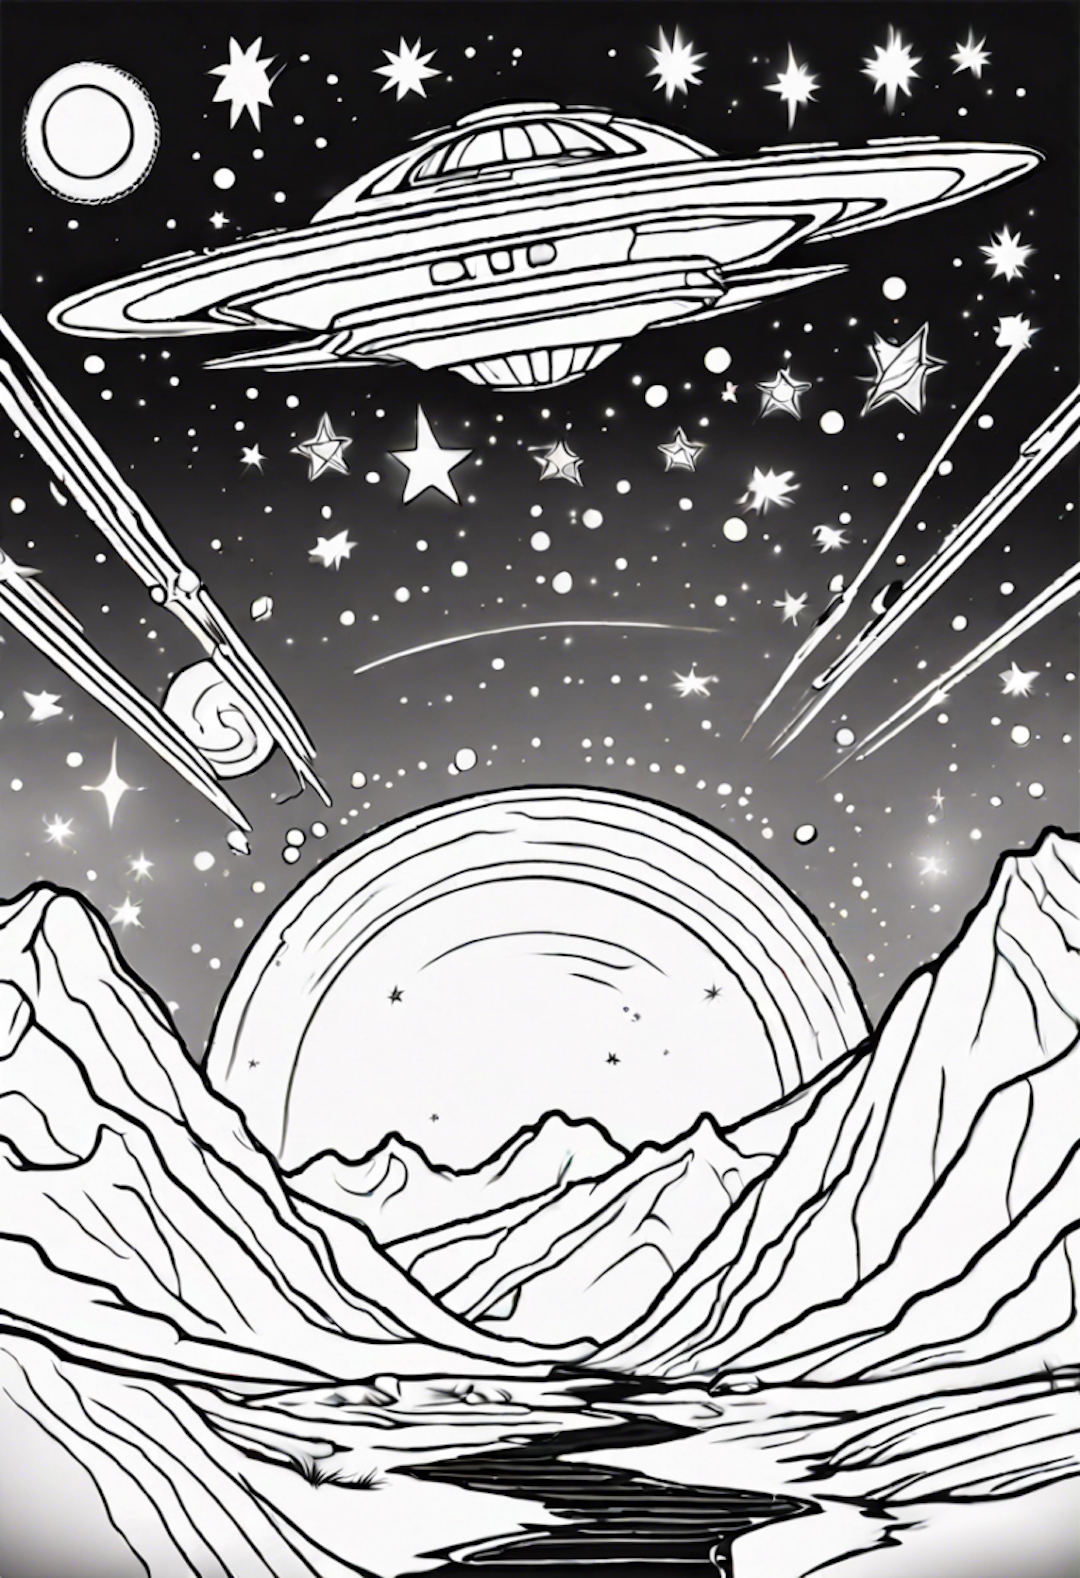 Seven Delighted Stars Going On A Starship Adventure coloring pages